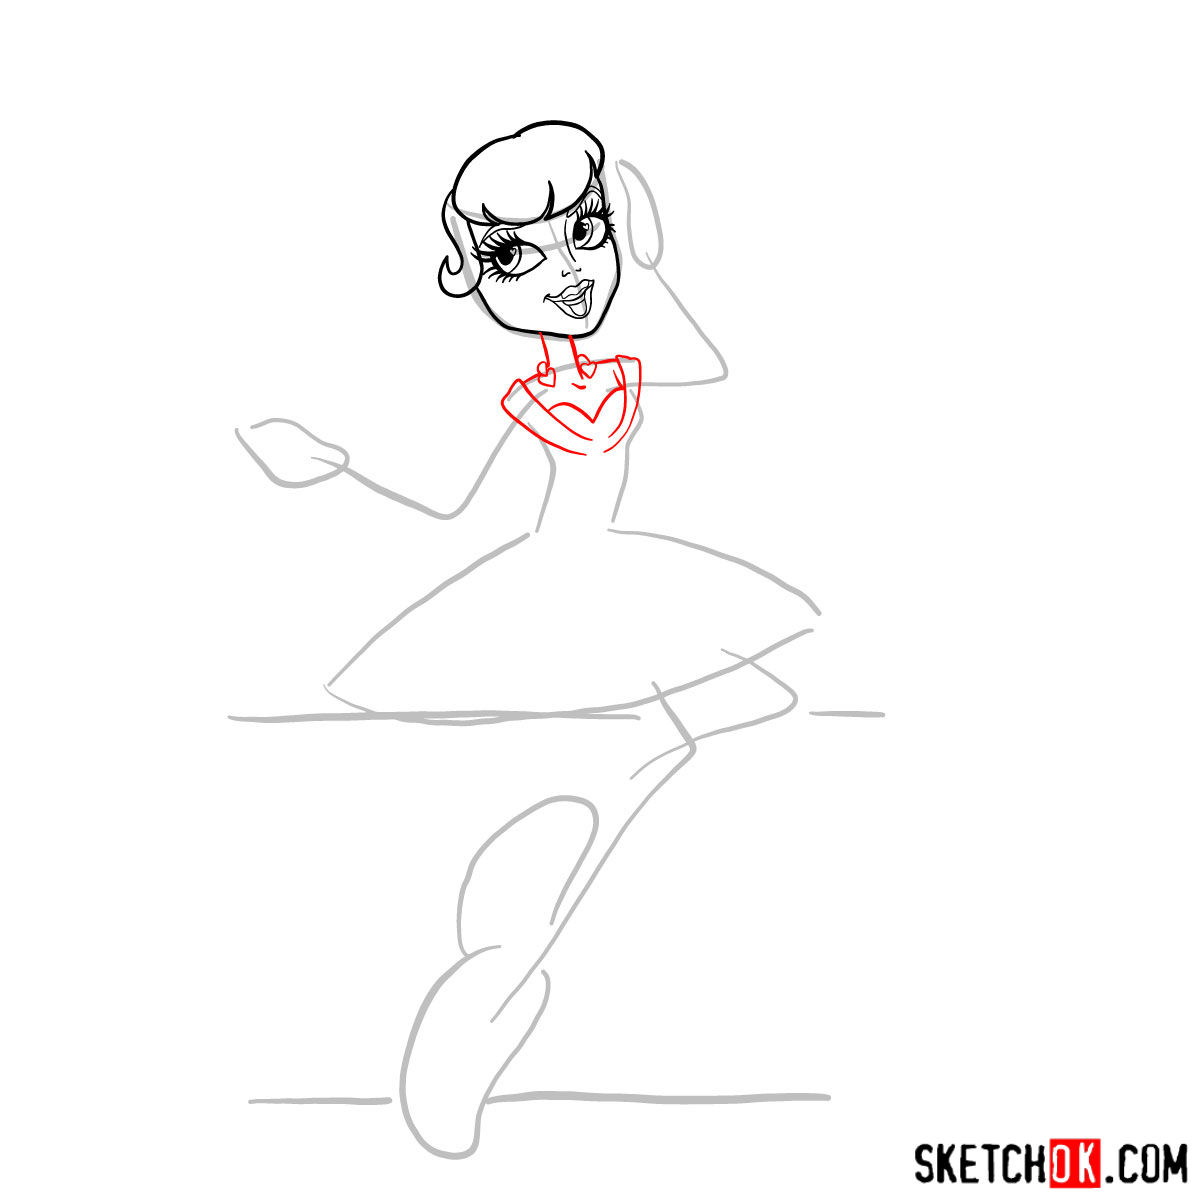 How to draw C.A. Cupid step by step - step 05